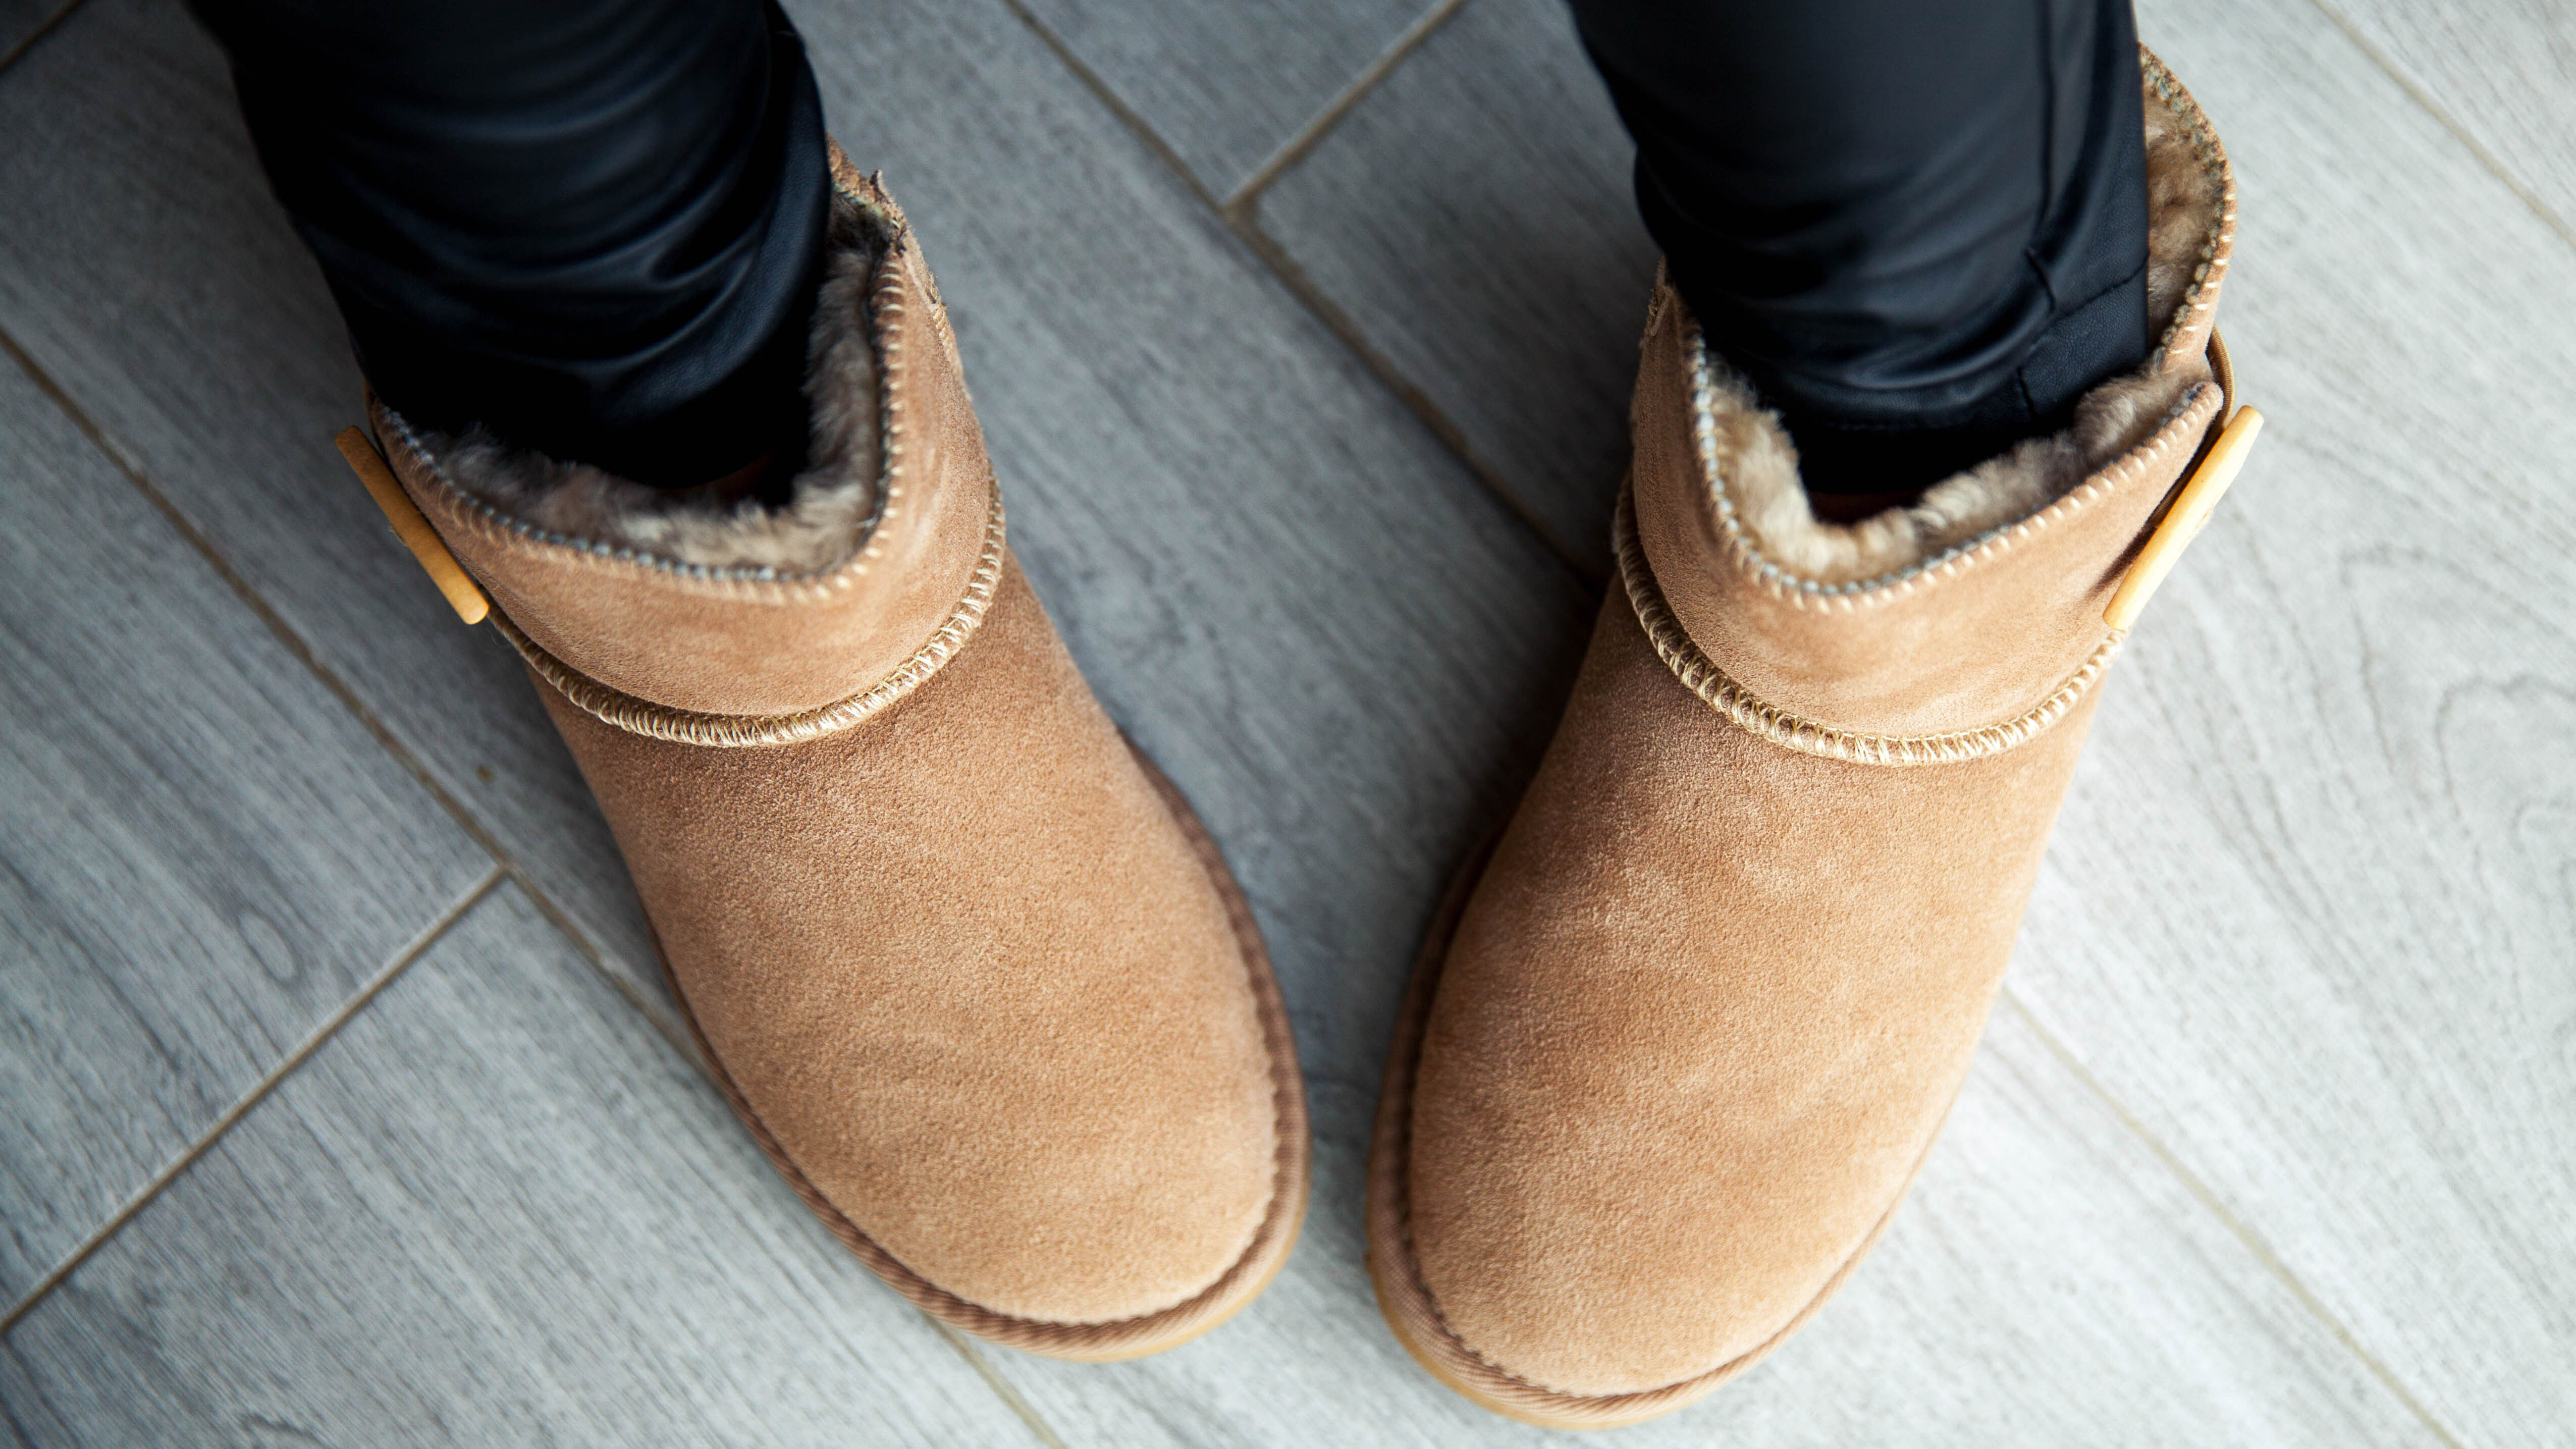 How to clean Ugg boots without ruining them | Tom's Guide